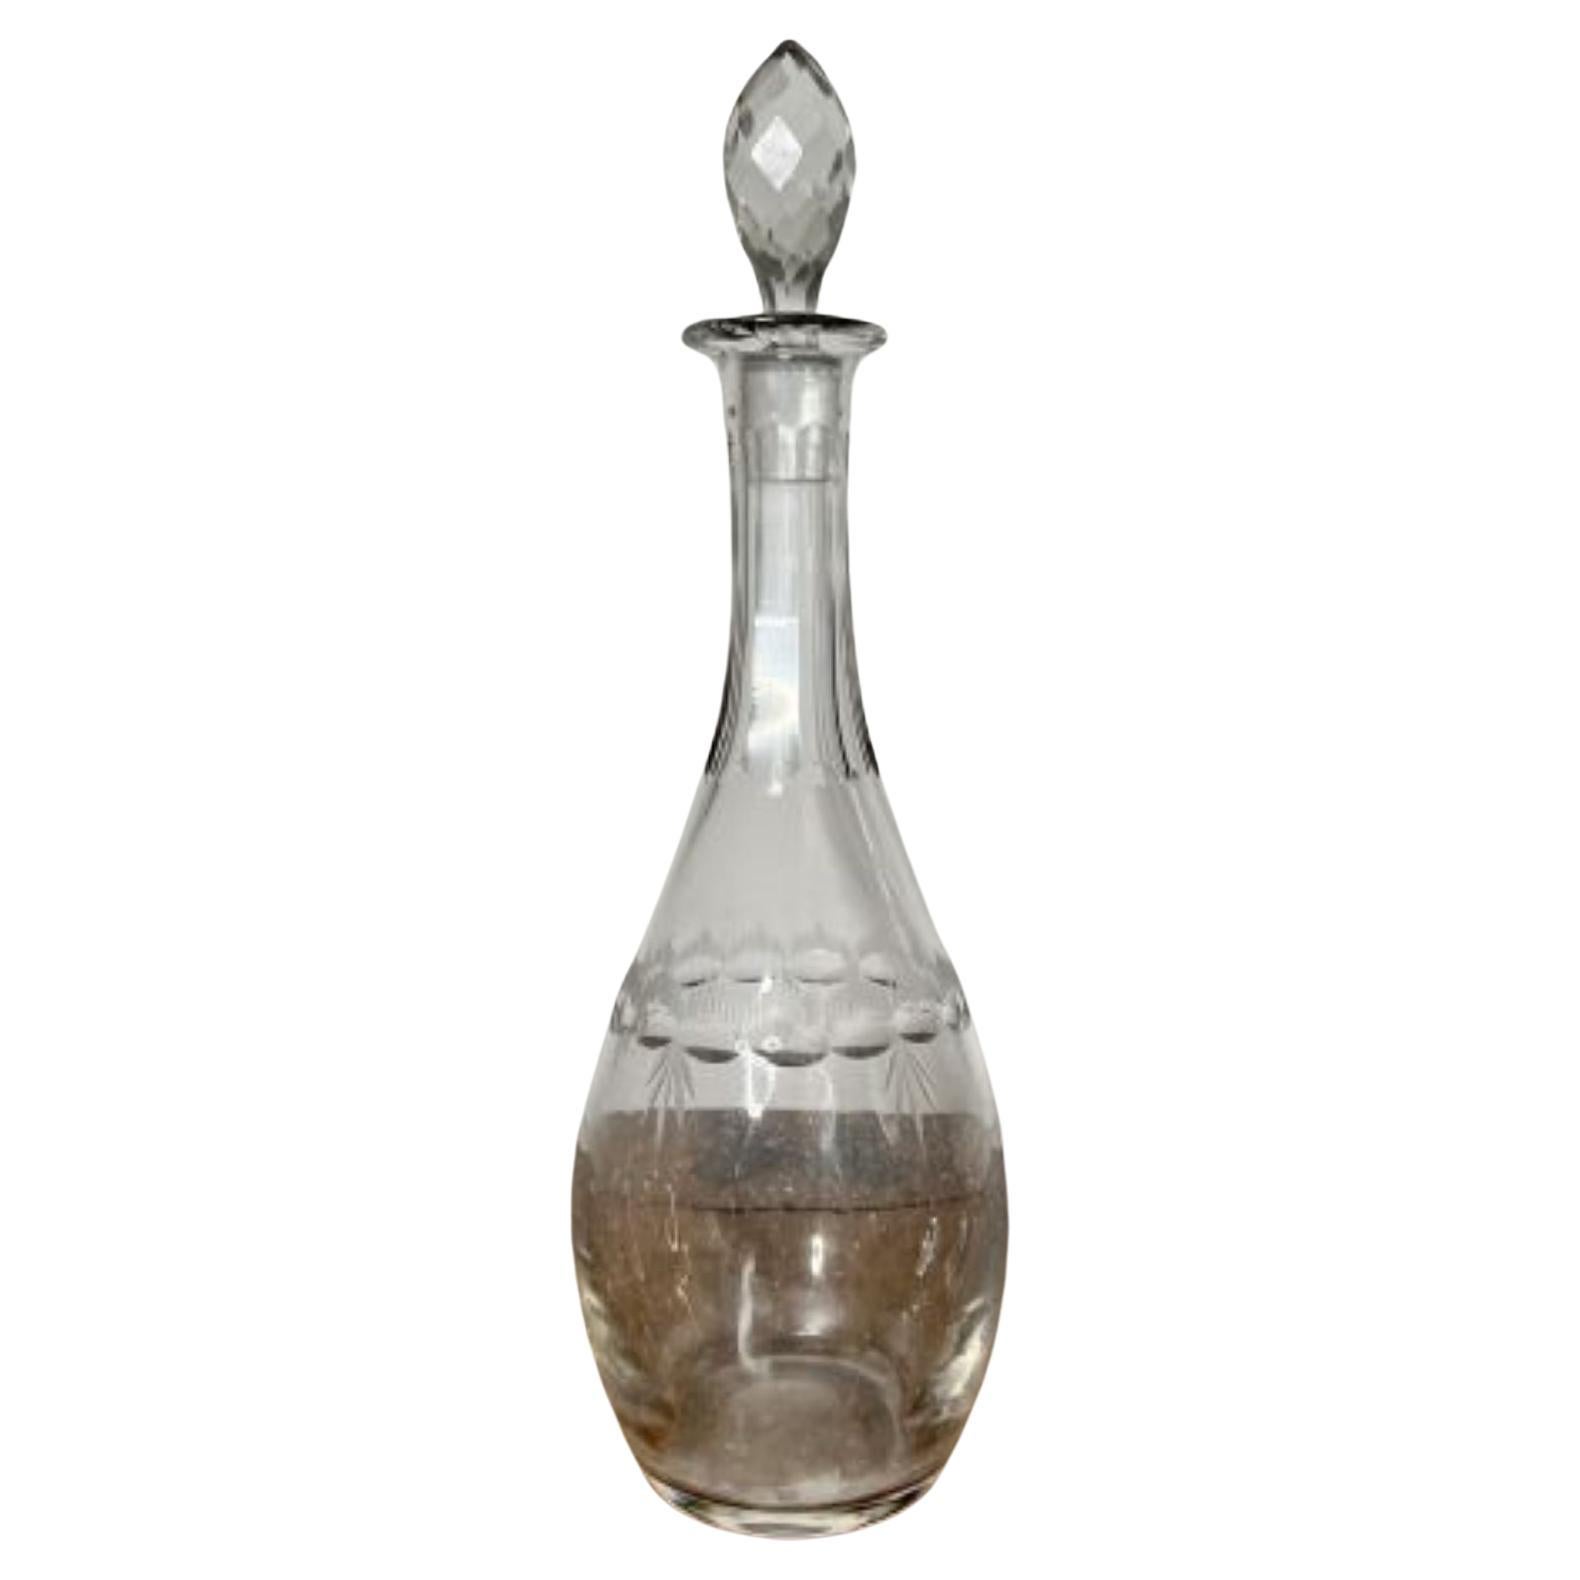 Quality antique Edwardian glass decanter  For Sale